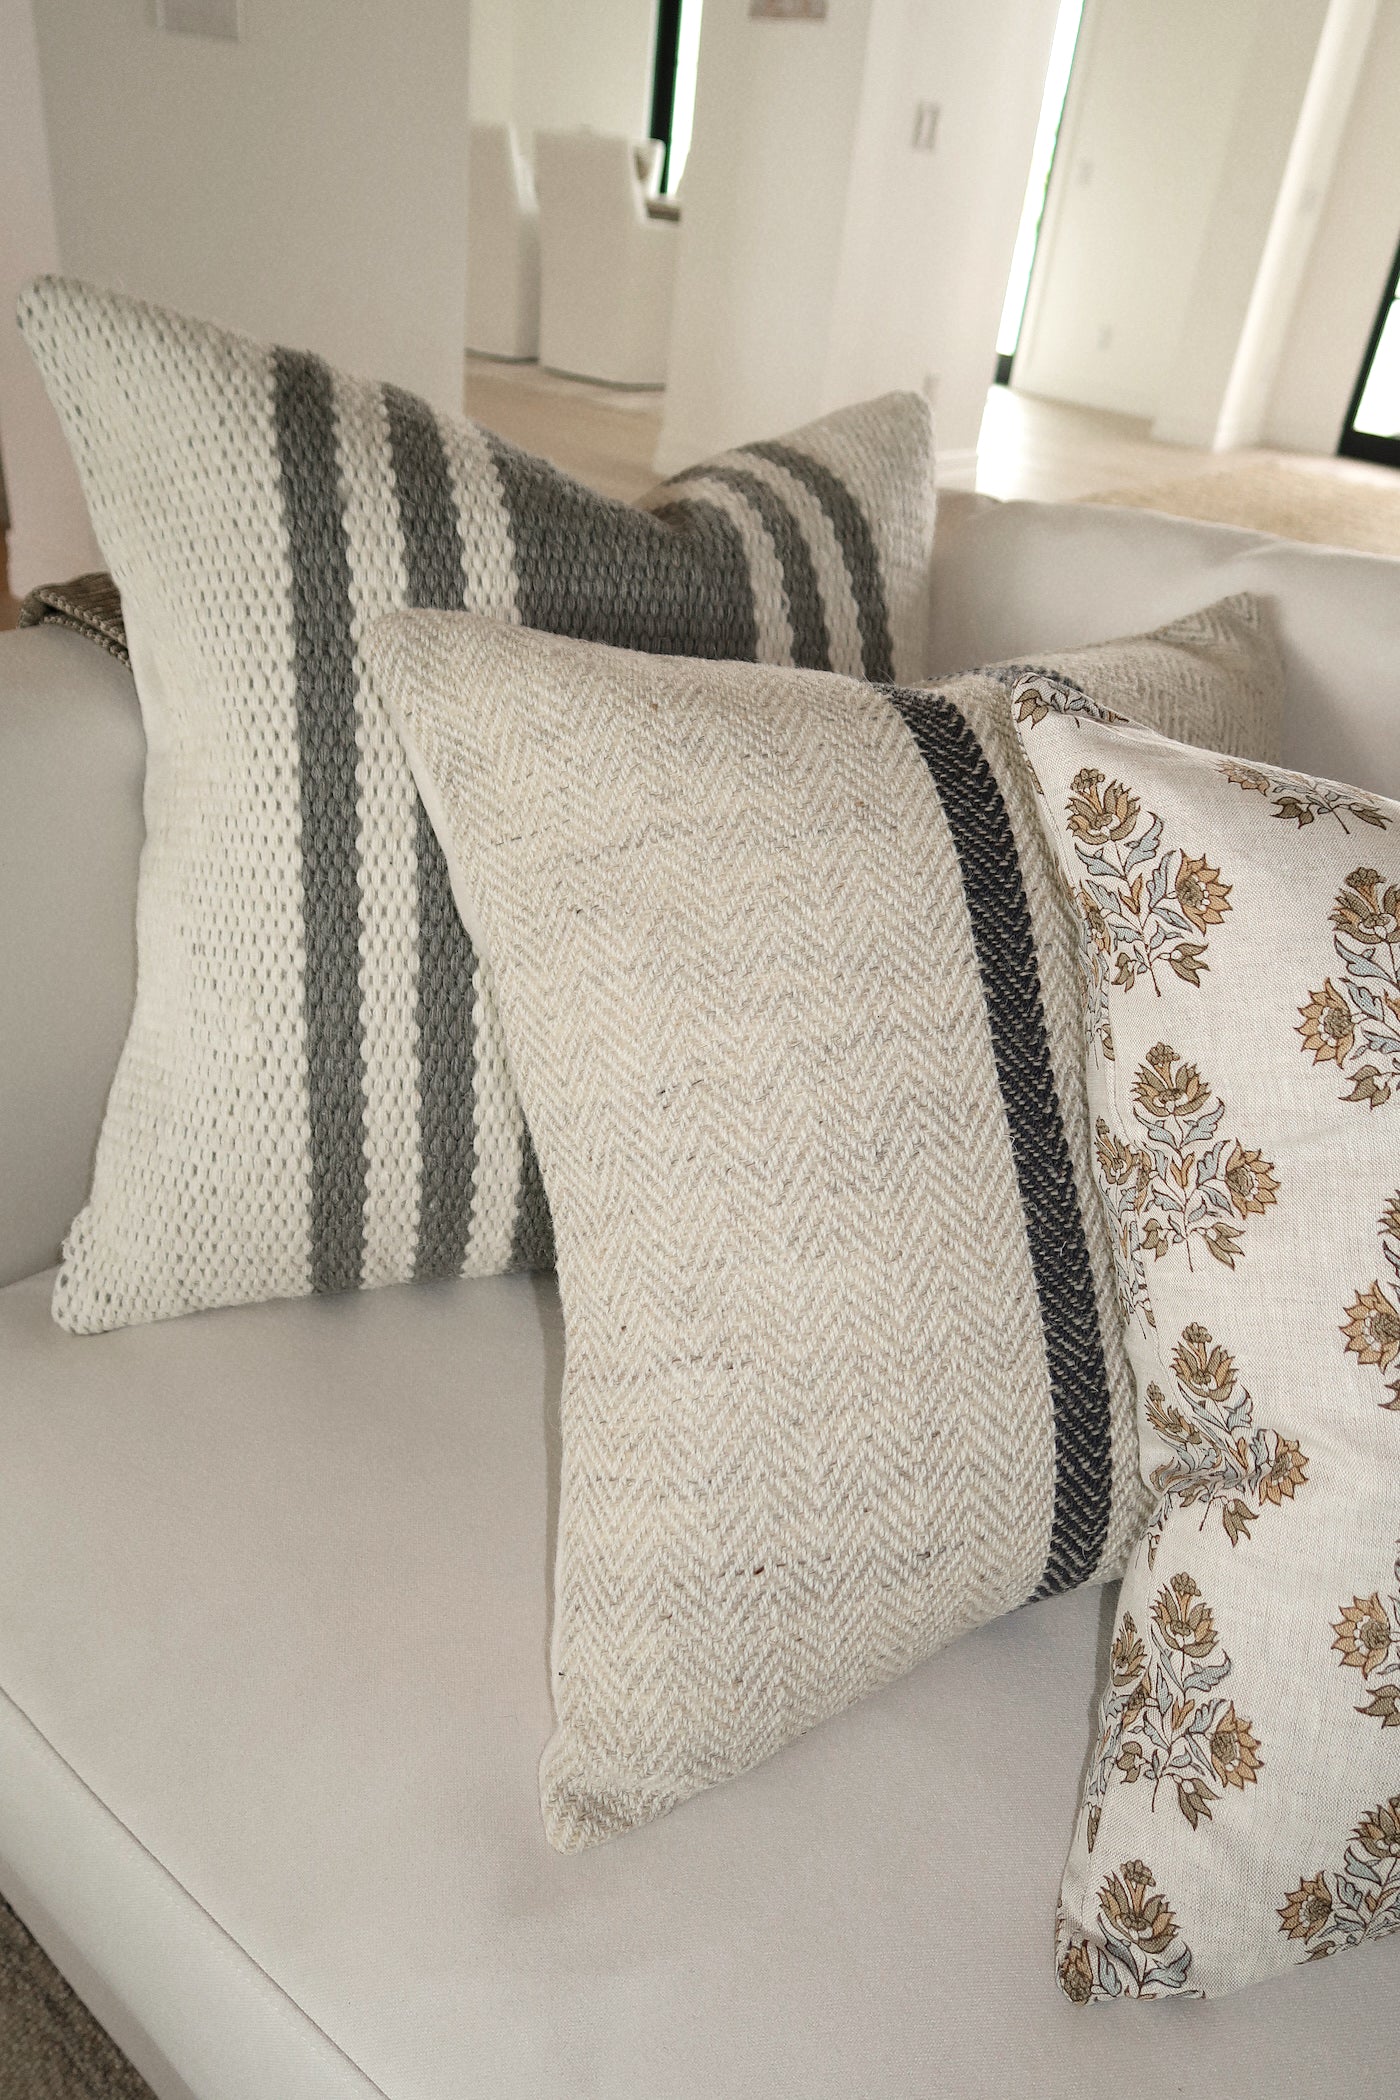 Tranquil Striped Pillow - Grey